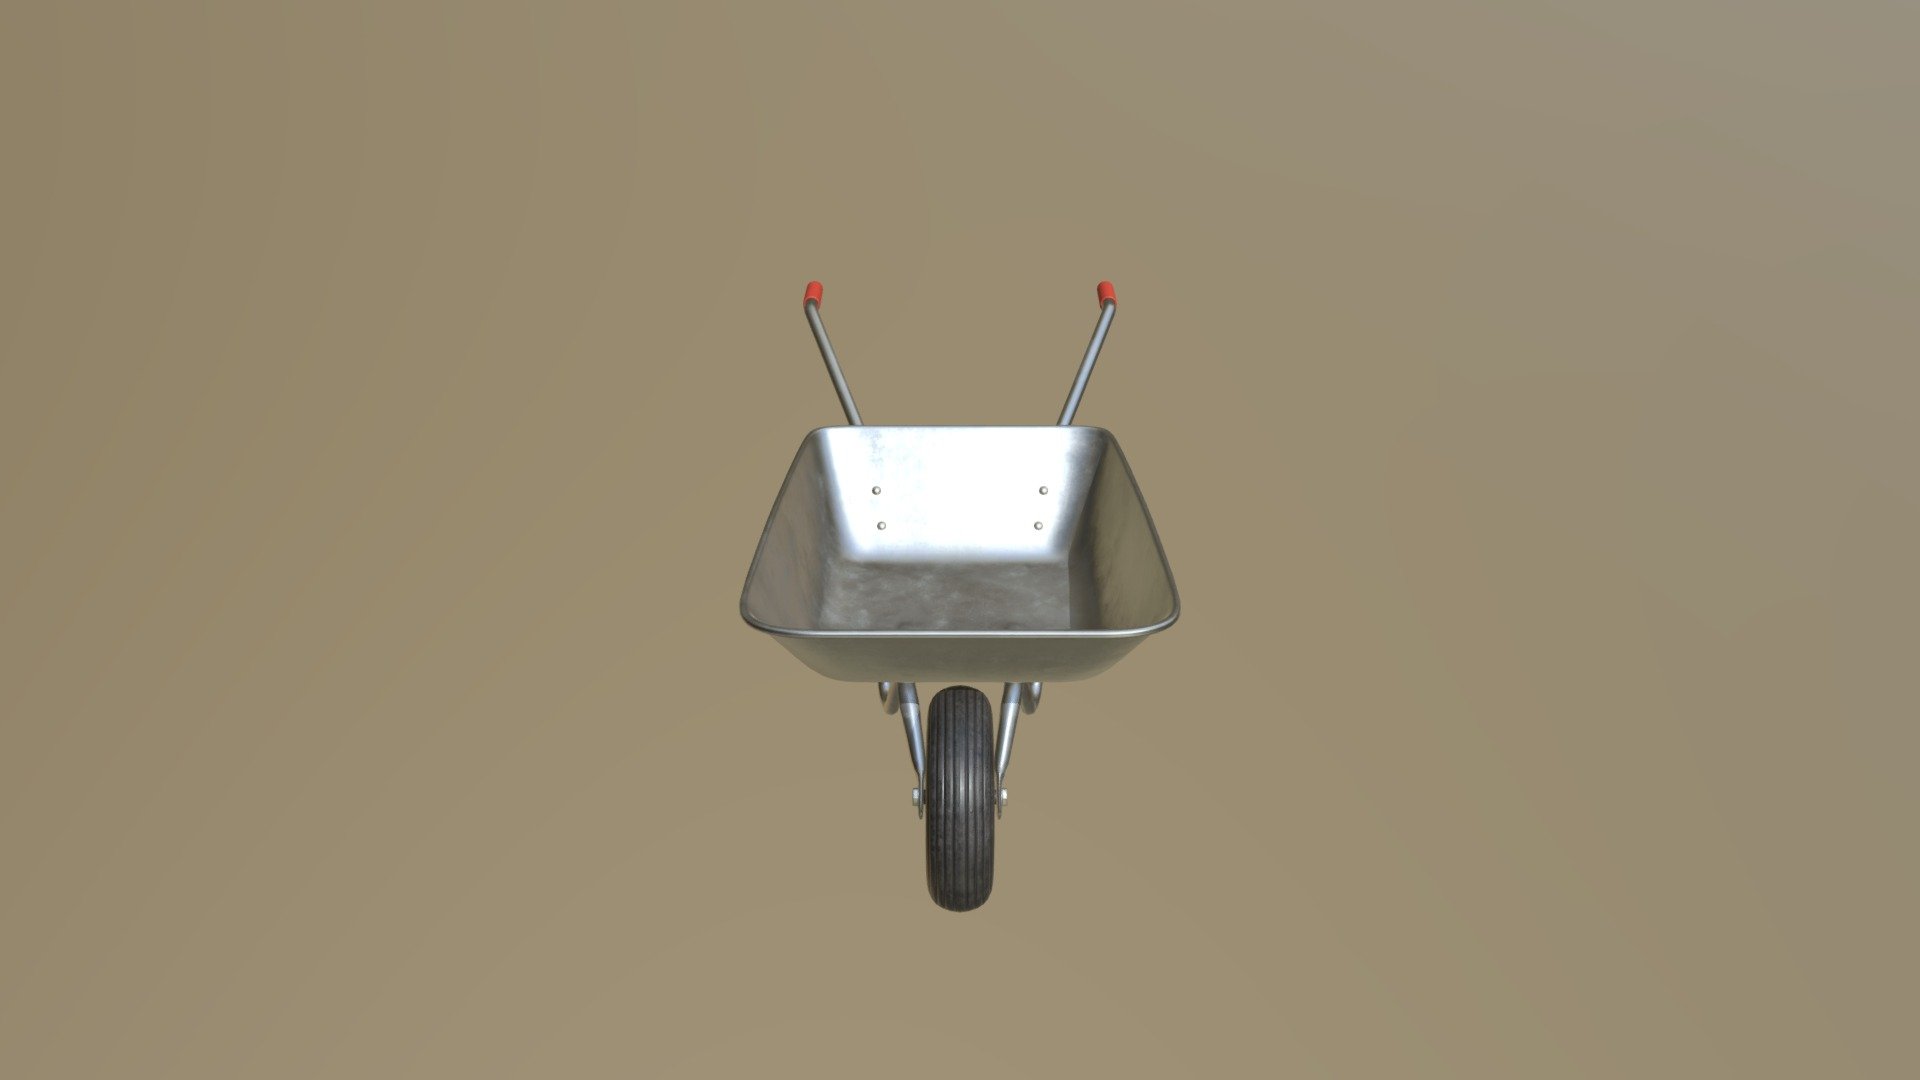 Wheelbarrow  - Lowpoly, optimized for modern game engines and cinematic scenes  - Model have 1 Texture set 4K resolution  _ -link removed-  Polygons: 8174 Verticies: 8134 Tris: 15624 - Wheelbarrow - 3D model by mzhigalov28 3d model